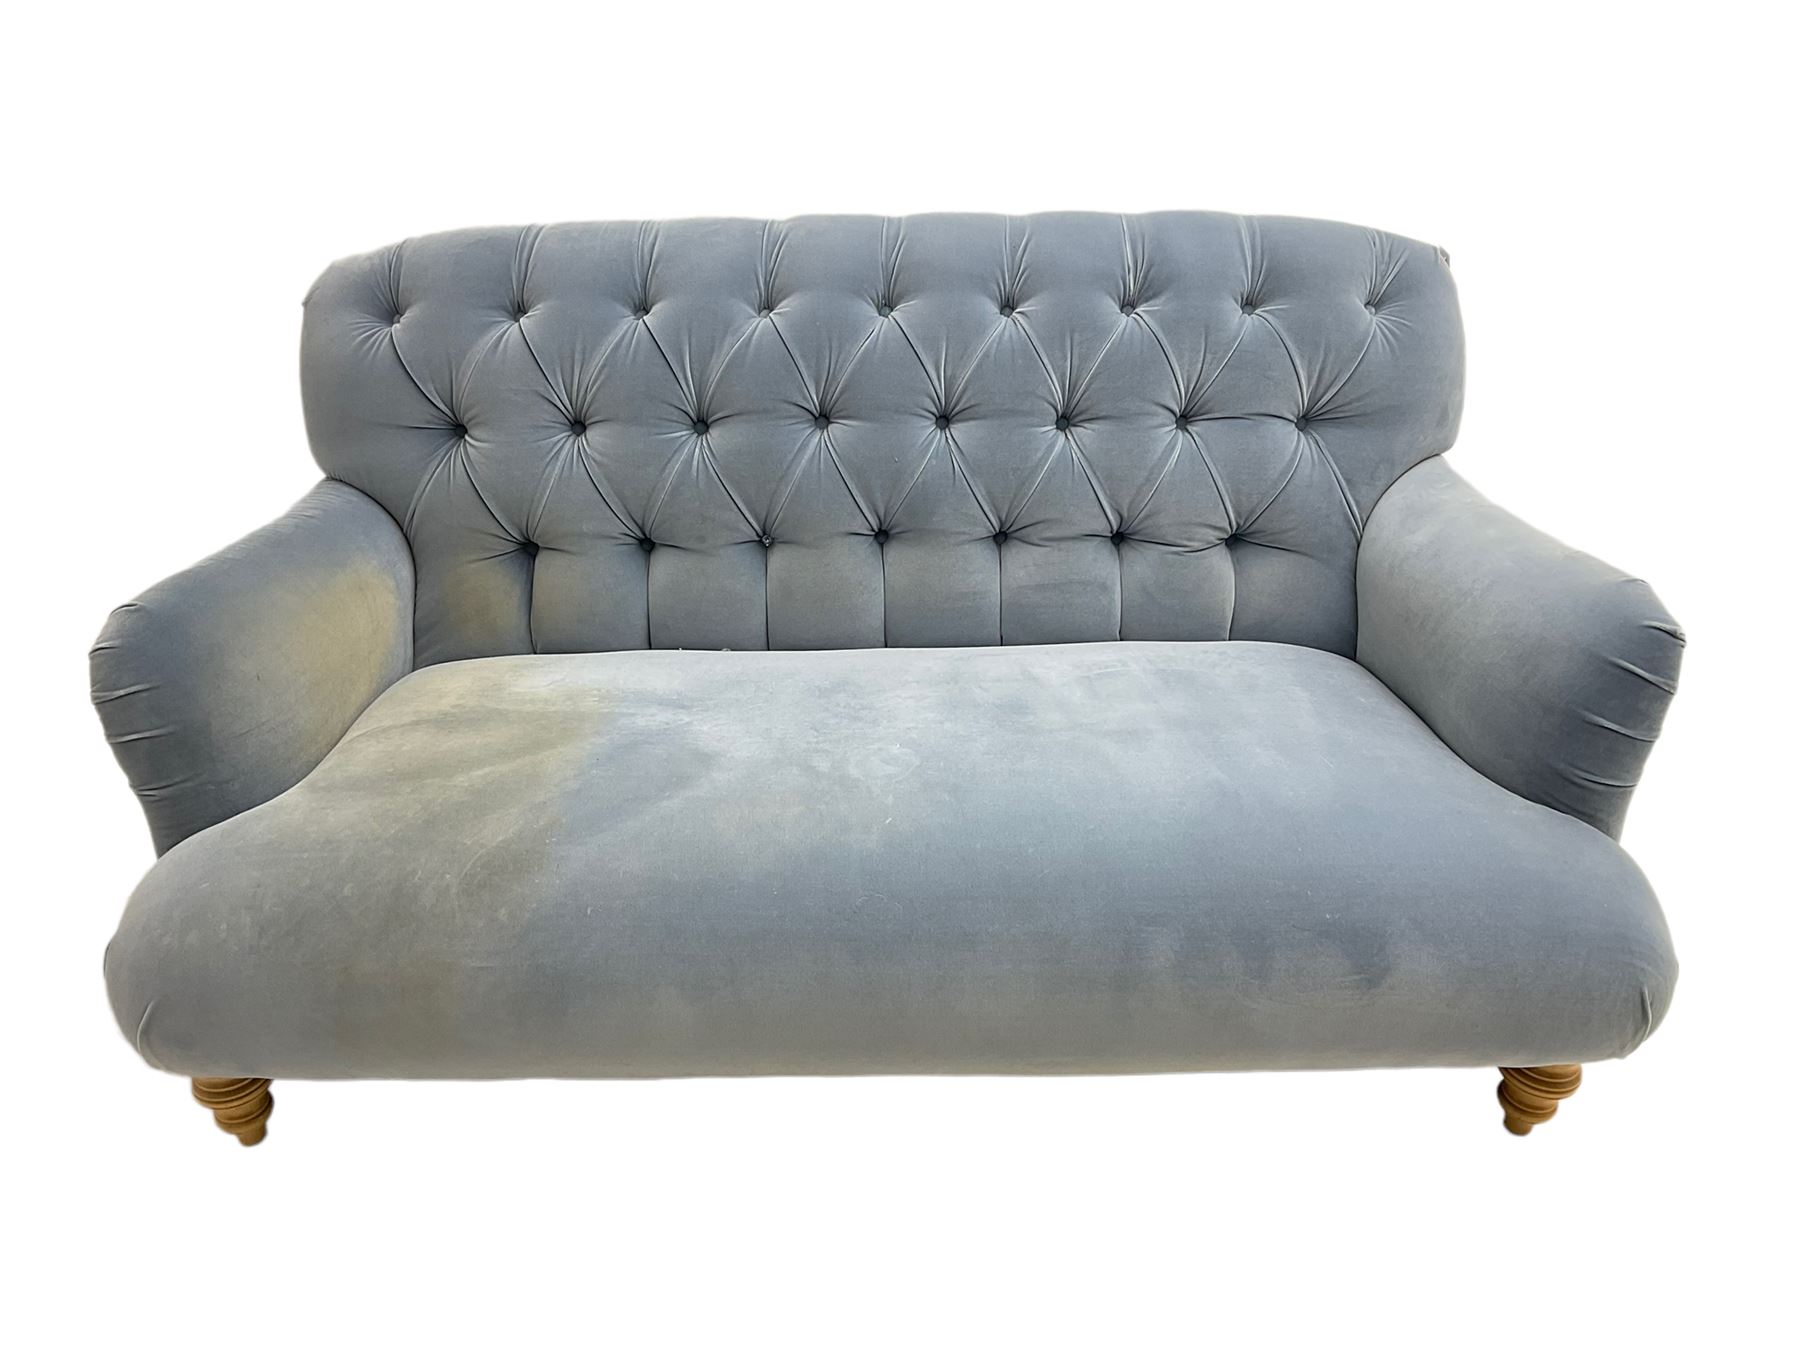 Tetrad - two seat sofa upholstered in baby blue buttoned fabric